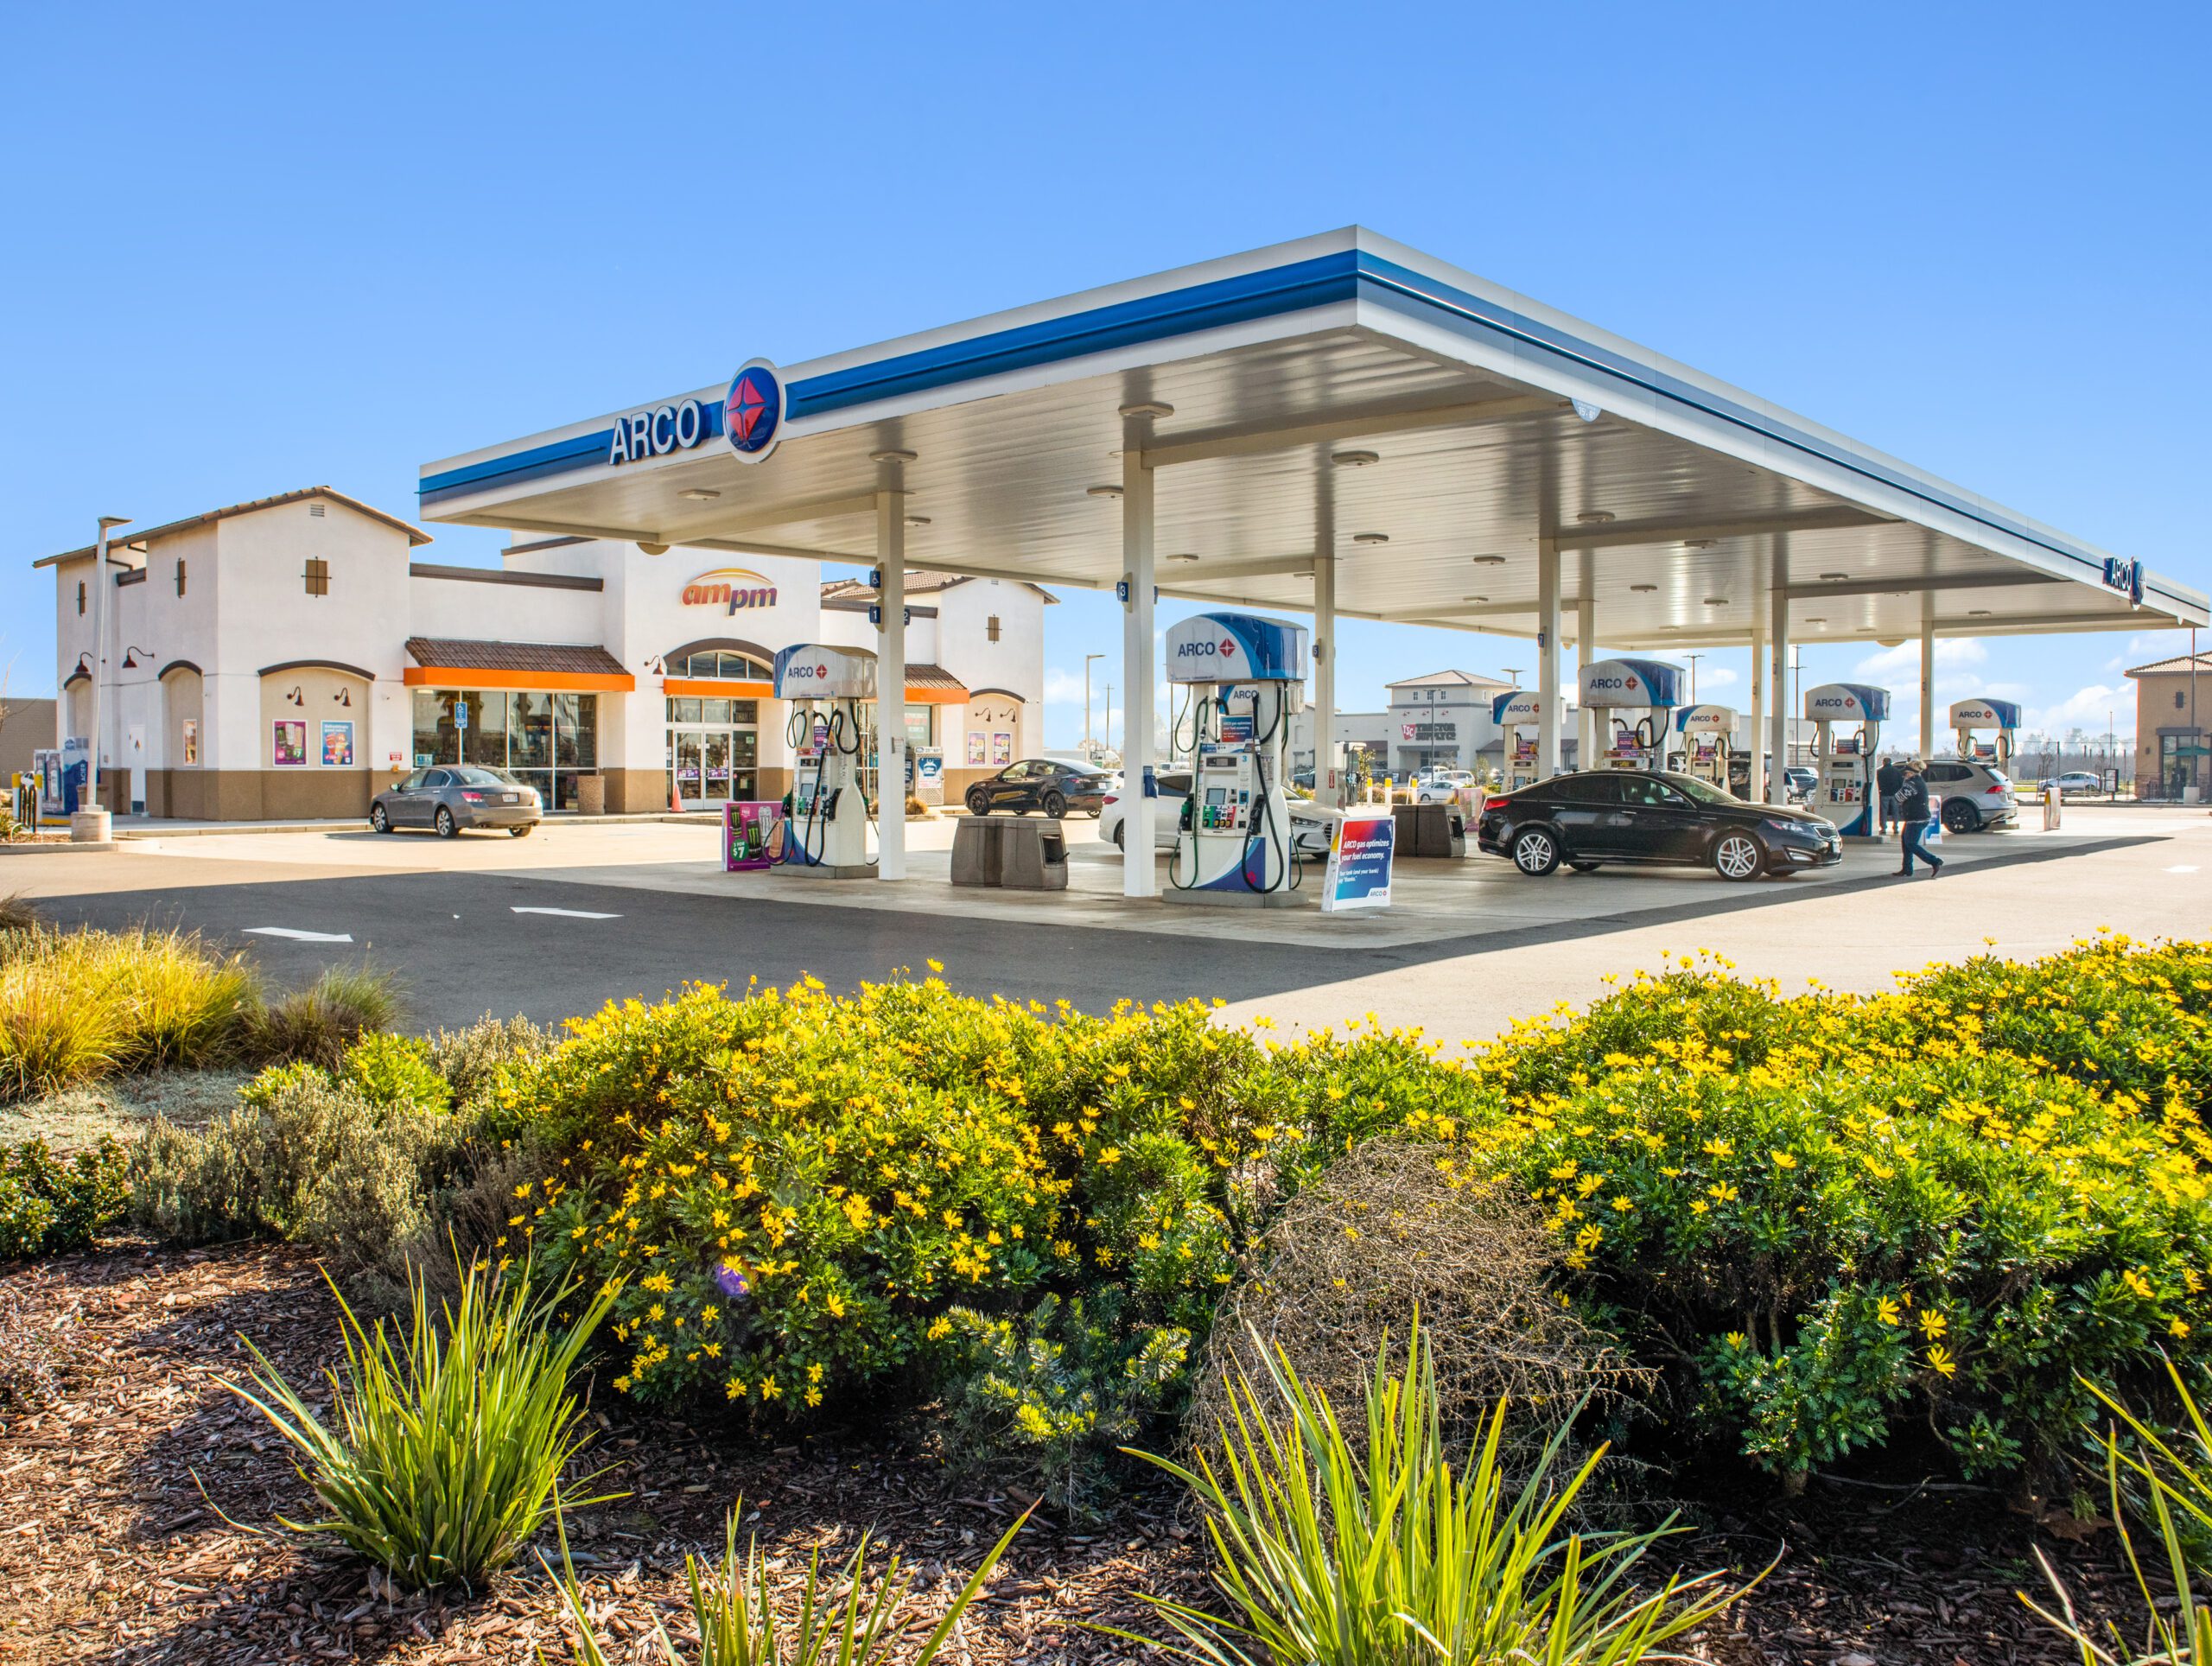 arco gas station